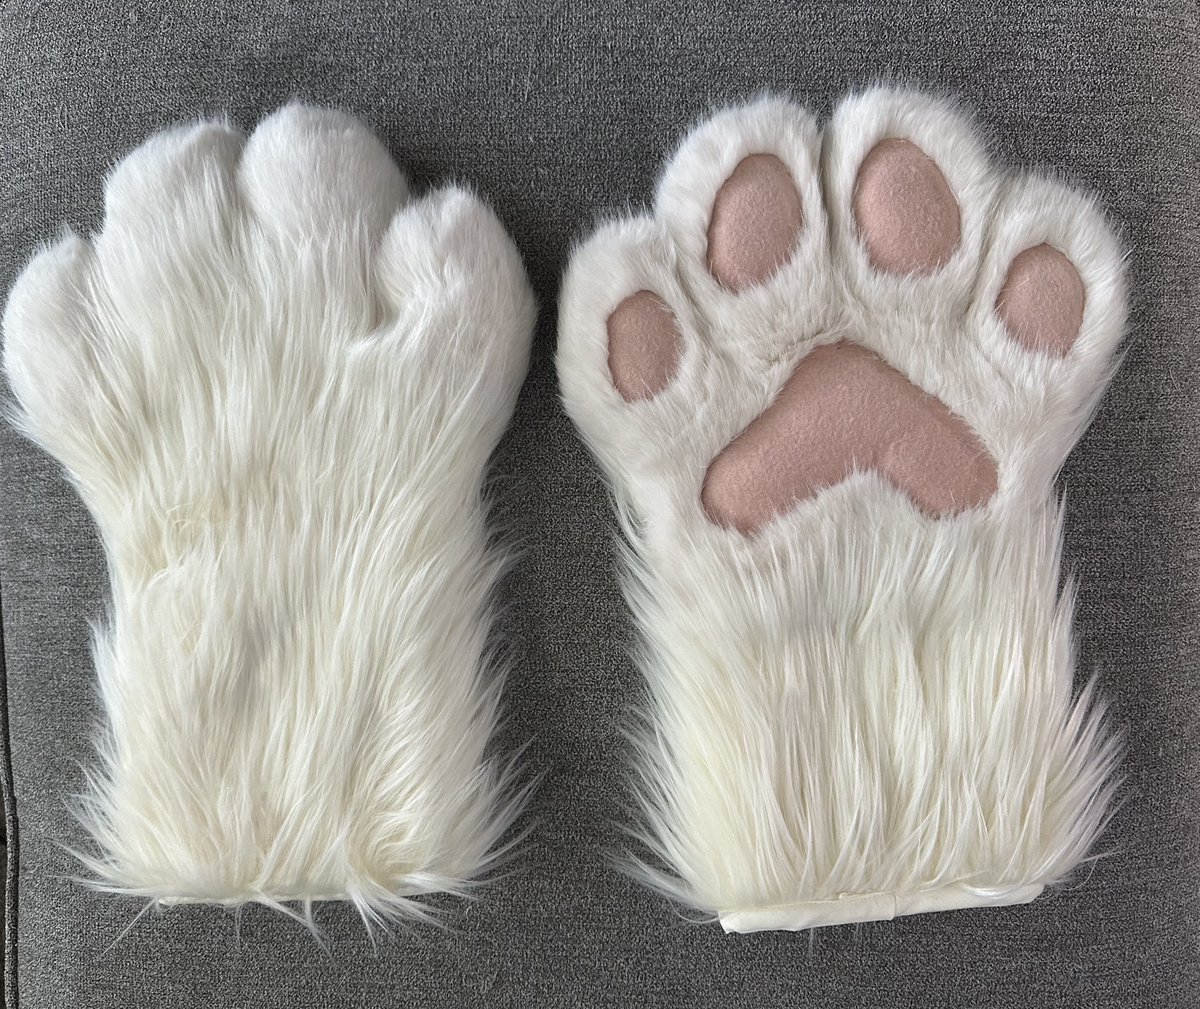 ‼️ IN TIME FOR AC DELIVERY! ‼️

head and tail by Melissa Mendelson (@/ZulayaWolf), paws by PawsNoFlaws. can be shipped or delivered to you at #AC2024 ! 2⃣0⃣0⃣0⃣ OBO, more details in thread!

#fursuit #fursuitforsale #anthrocon #fursuit #premade #forsale #costumeforsale #furry